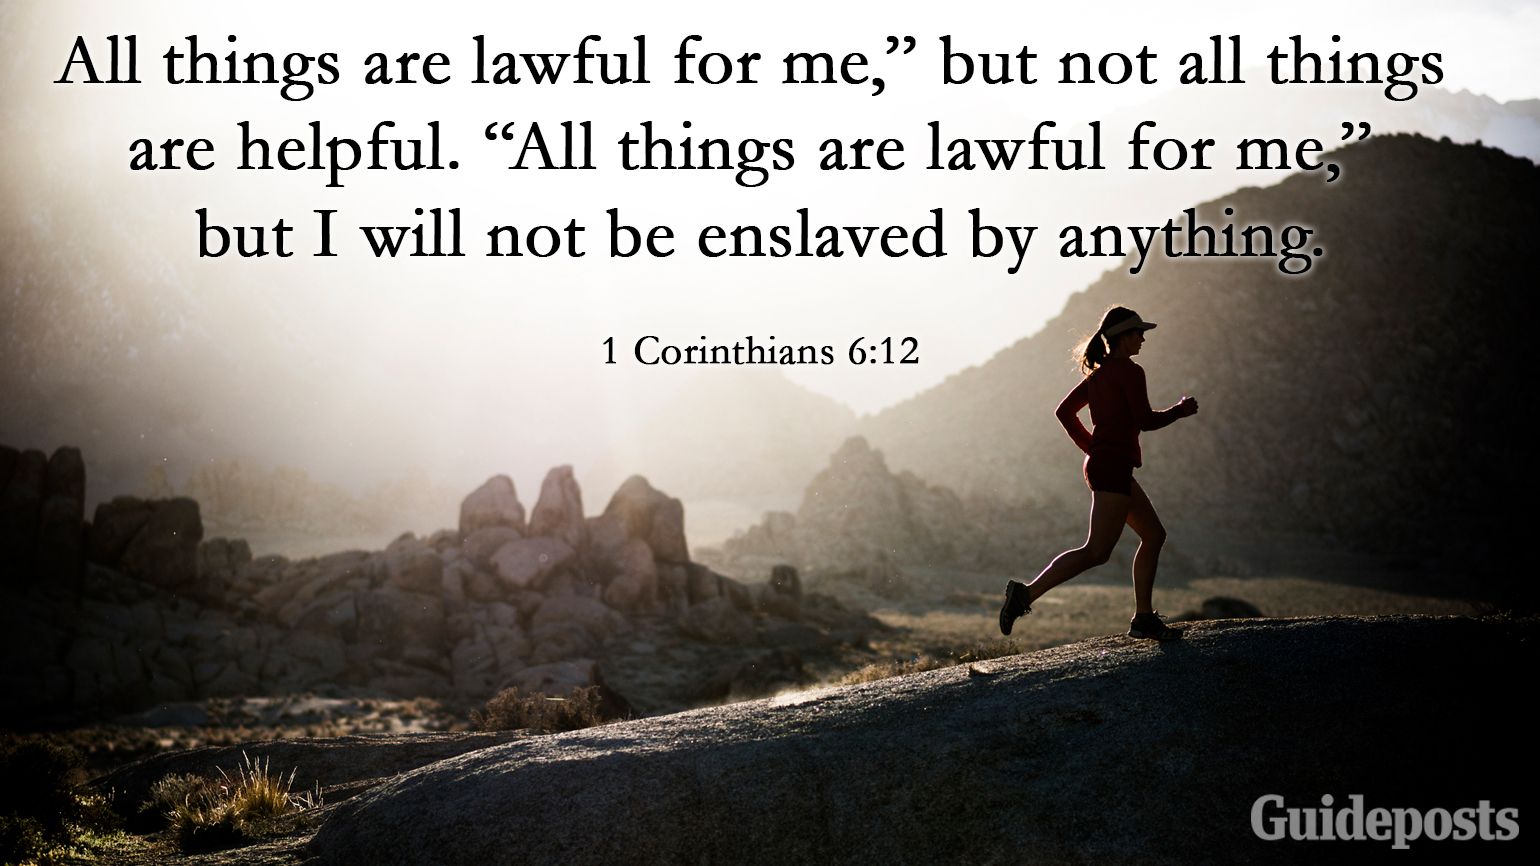 “All things are lawful for me,” but not all things are helpful. “All things are lawful for me,” but I will not be enslaved by anything.